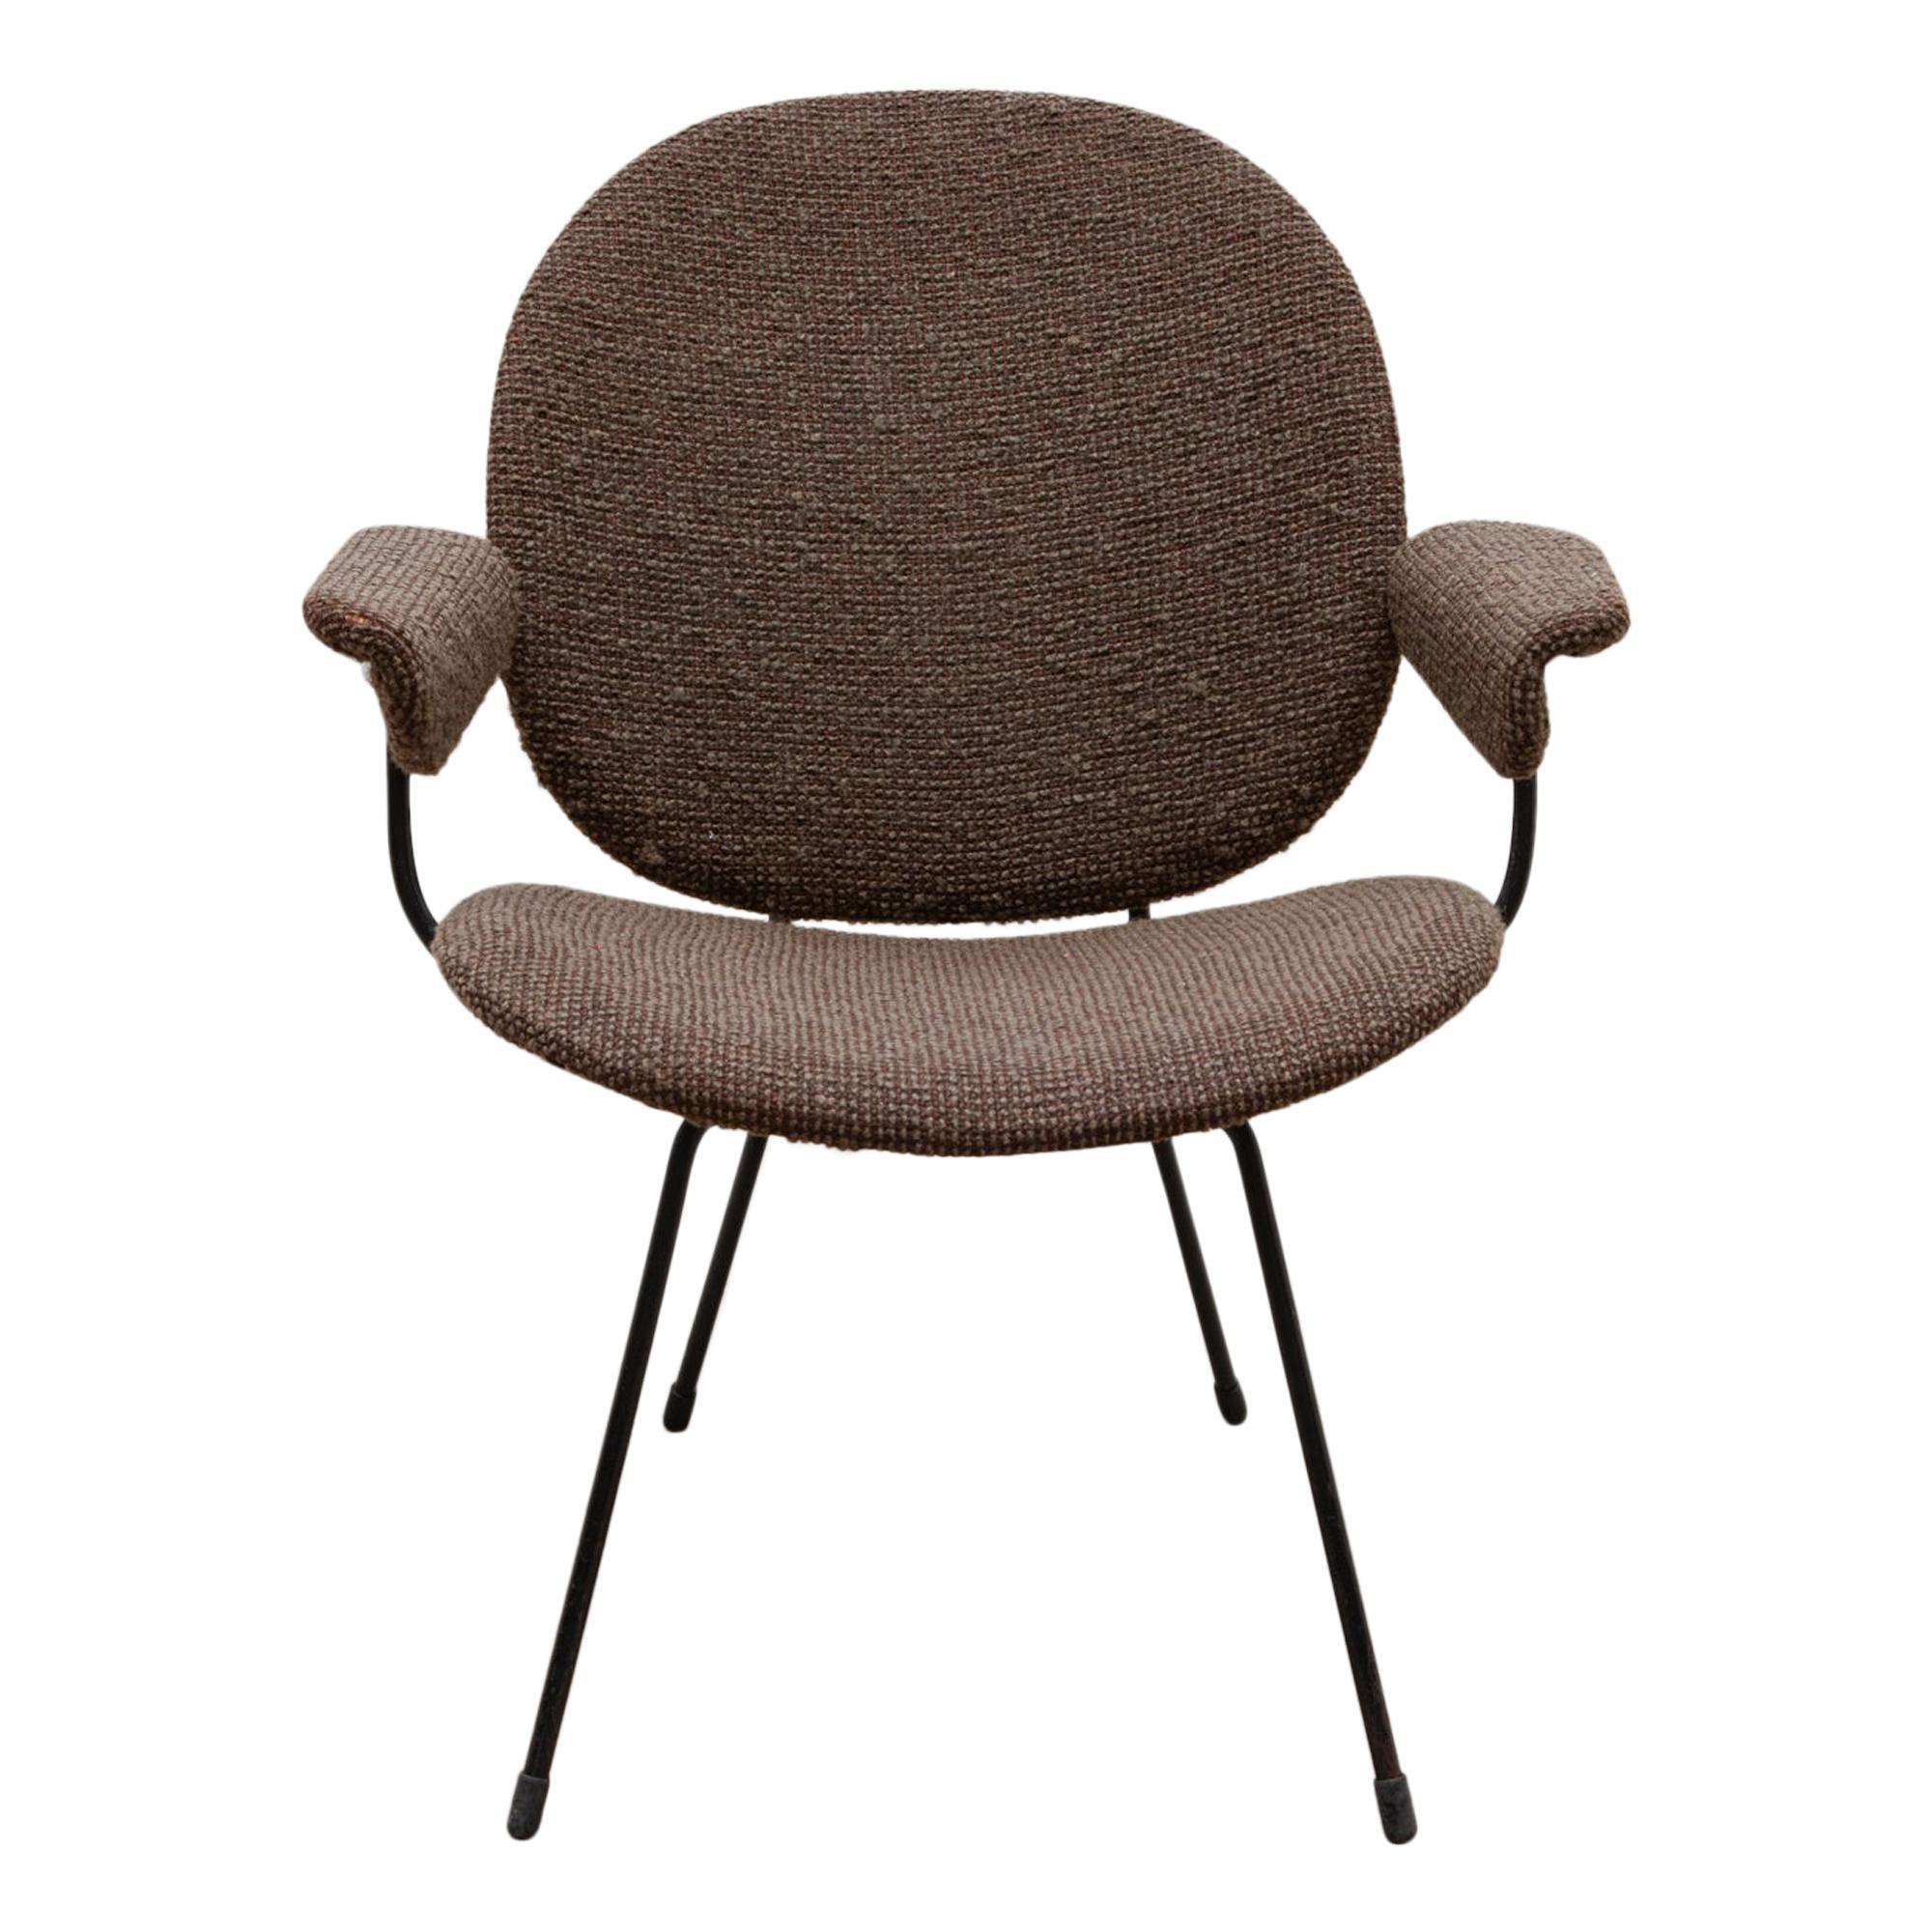 Dutch Design by Gispen Lounge Chair "Model 302" for Kembo For Sale